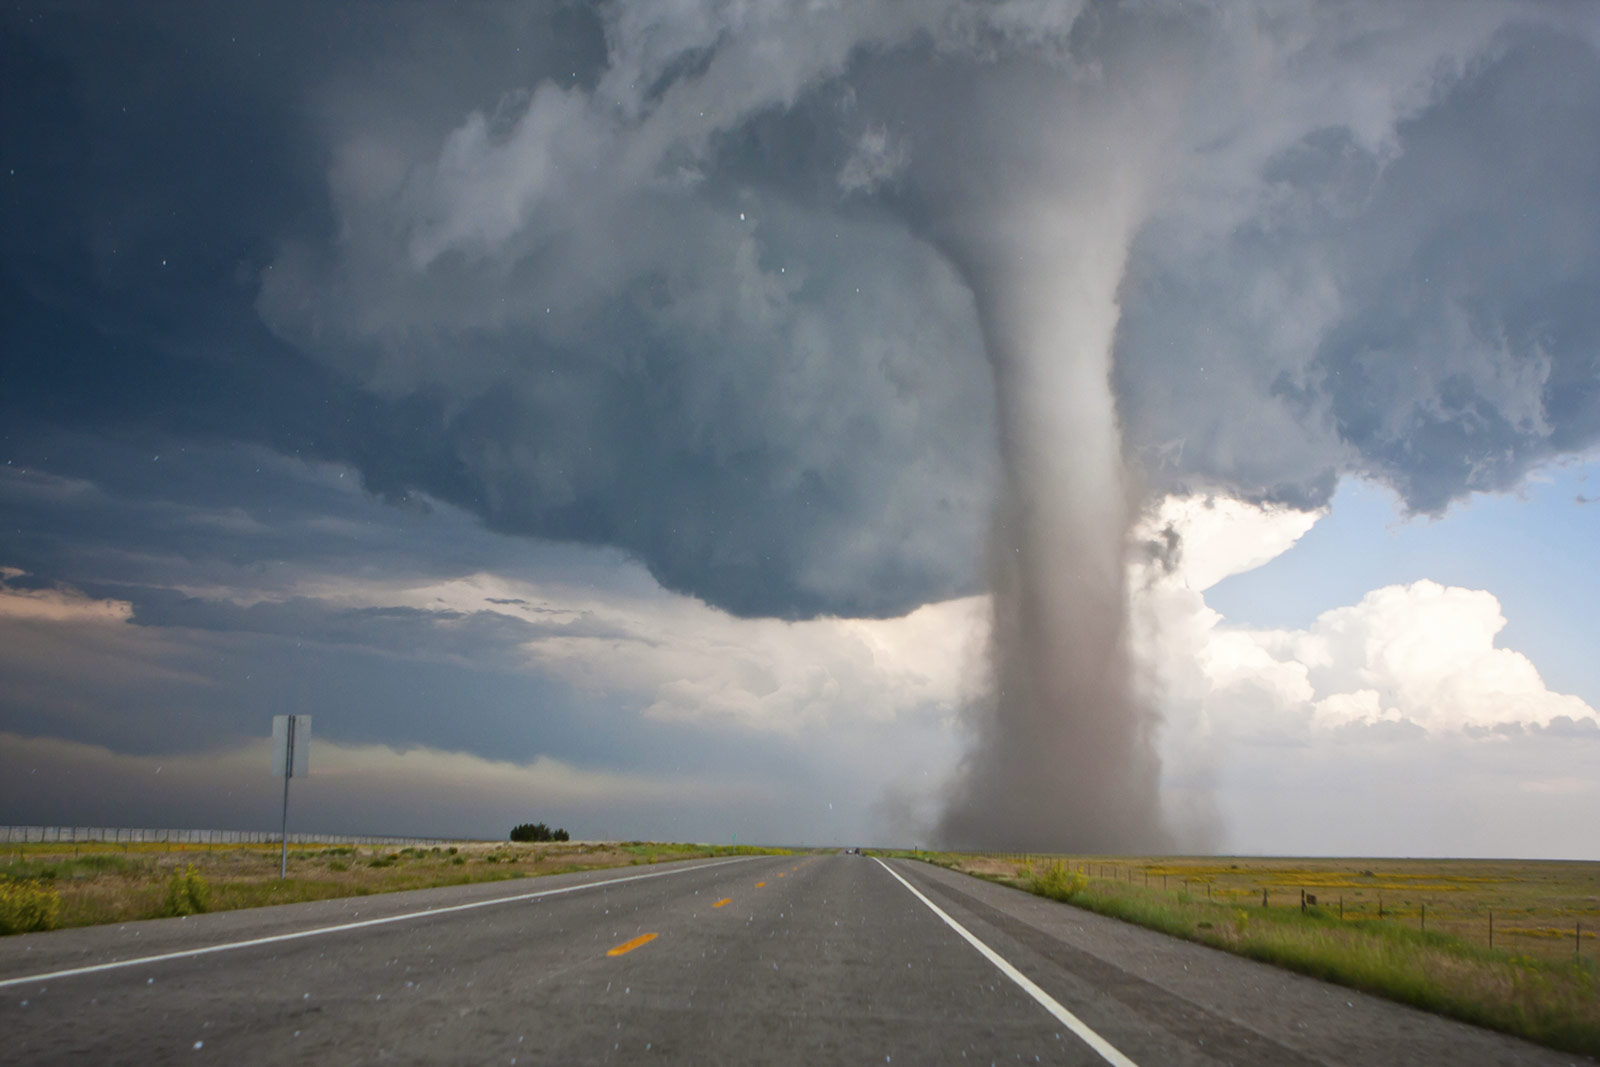 Tornadoes: Spinning Thunderstorms | AMNH